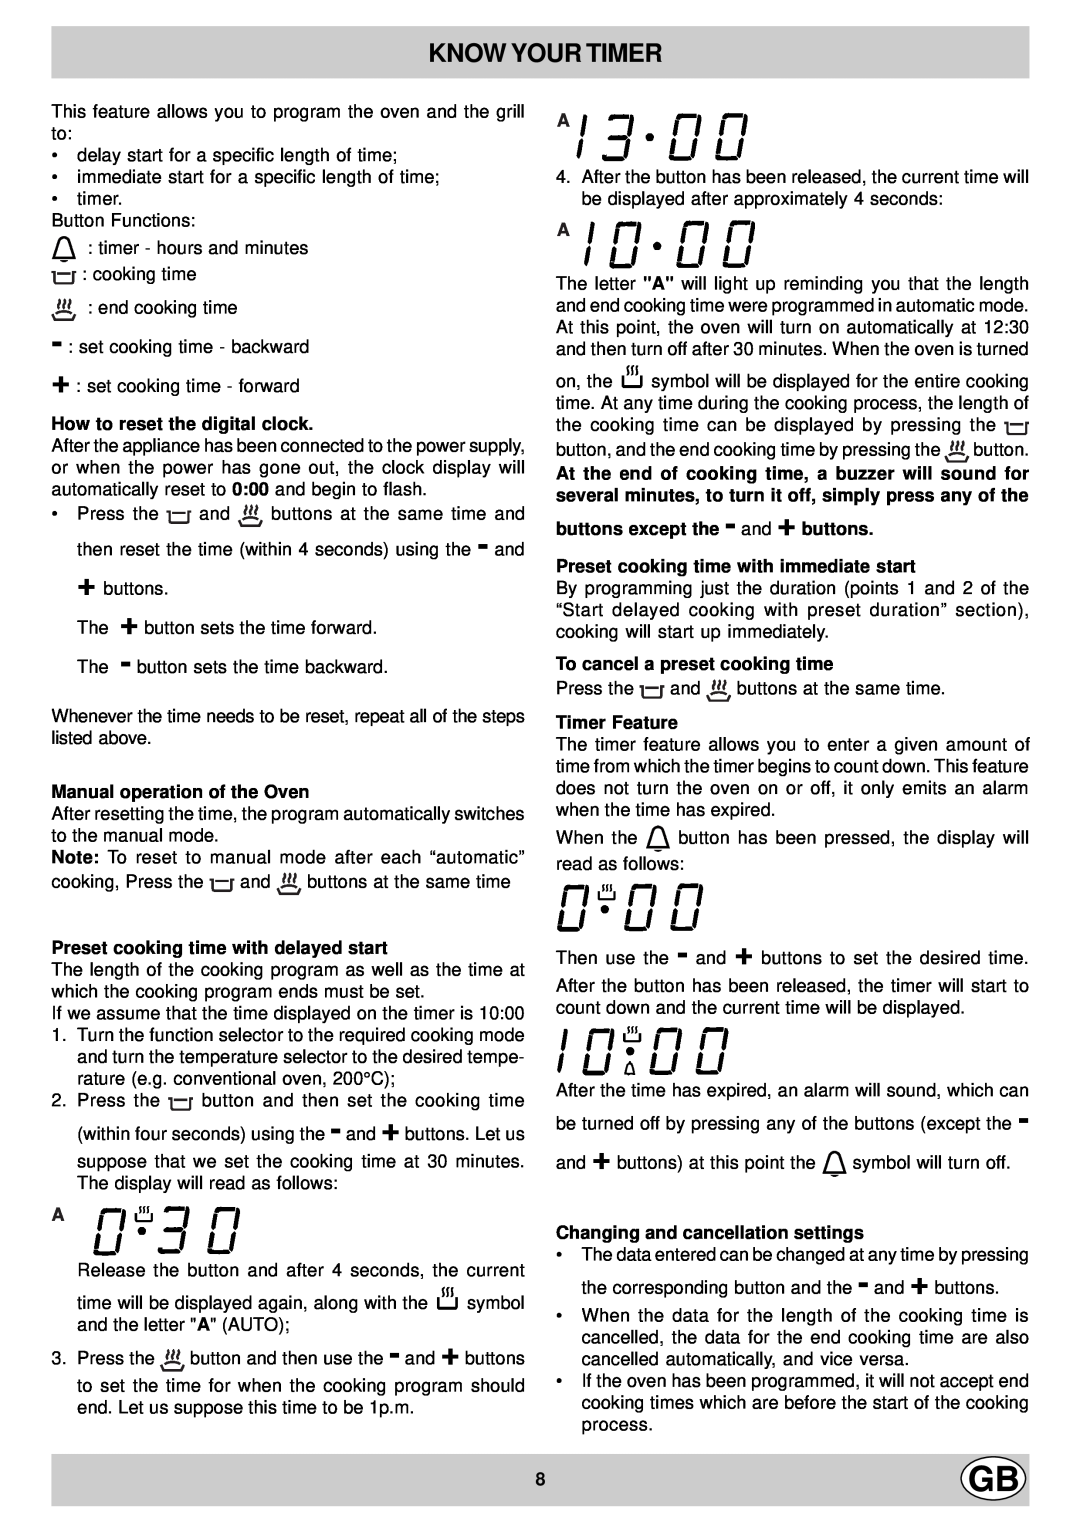 Hotpoint EG600X manual Know Your Timer, How to reset the digital clock, Manual operation of the Oven, Timer Feature 